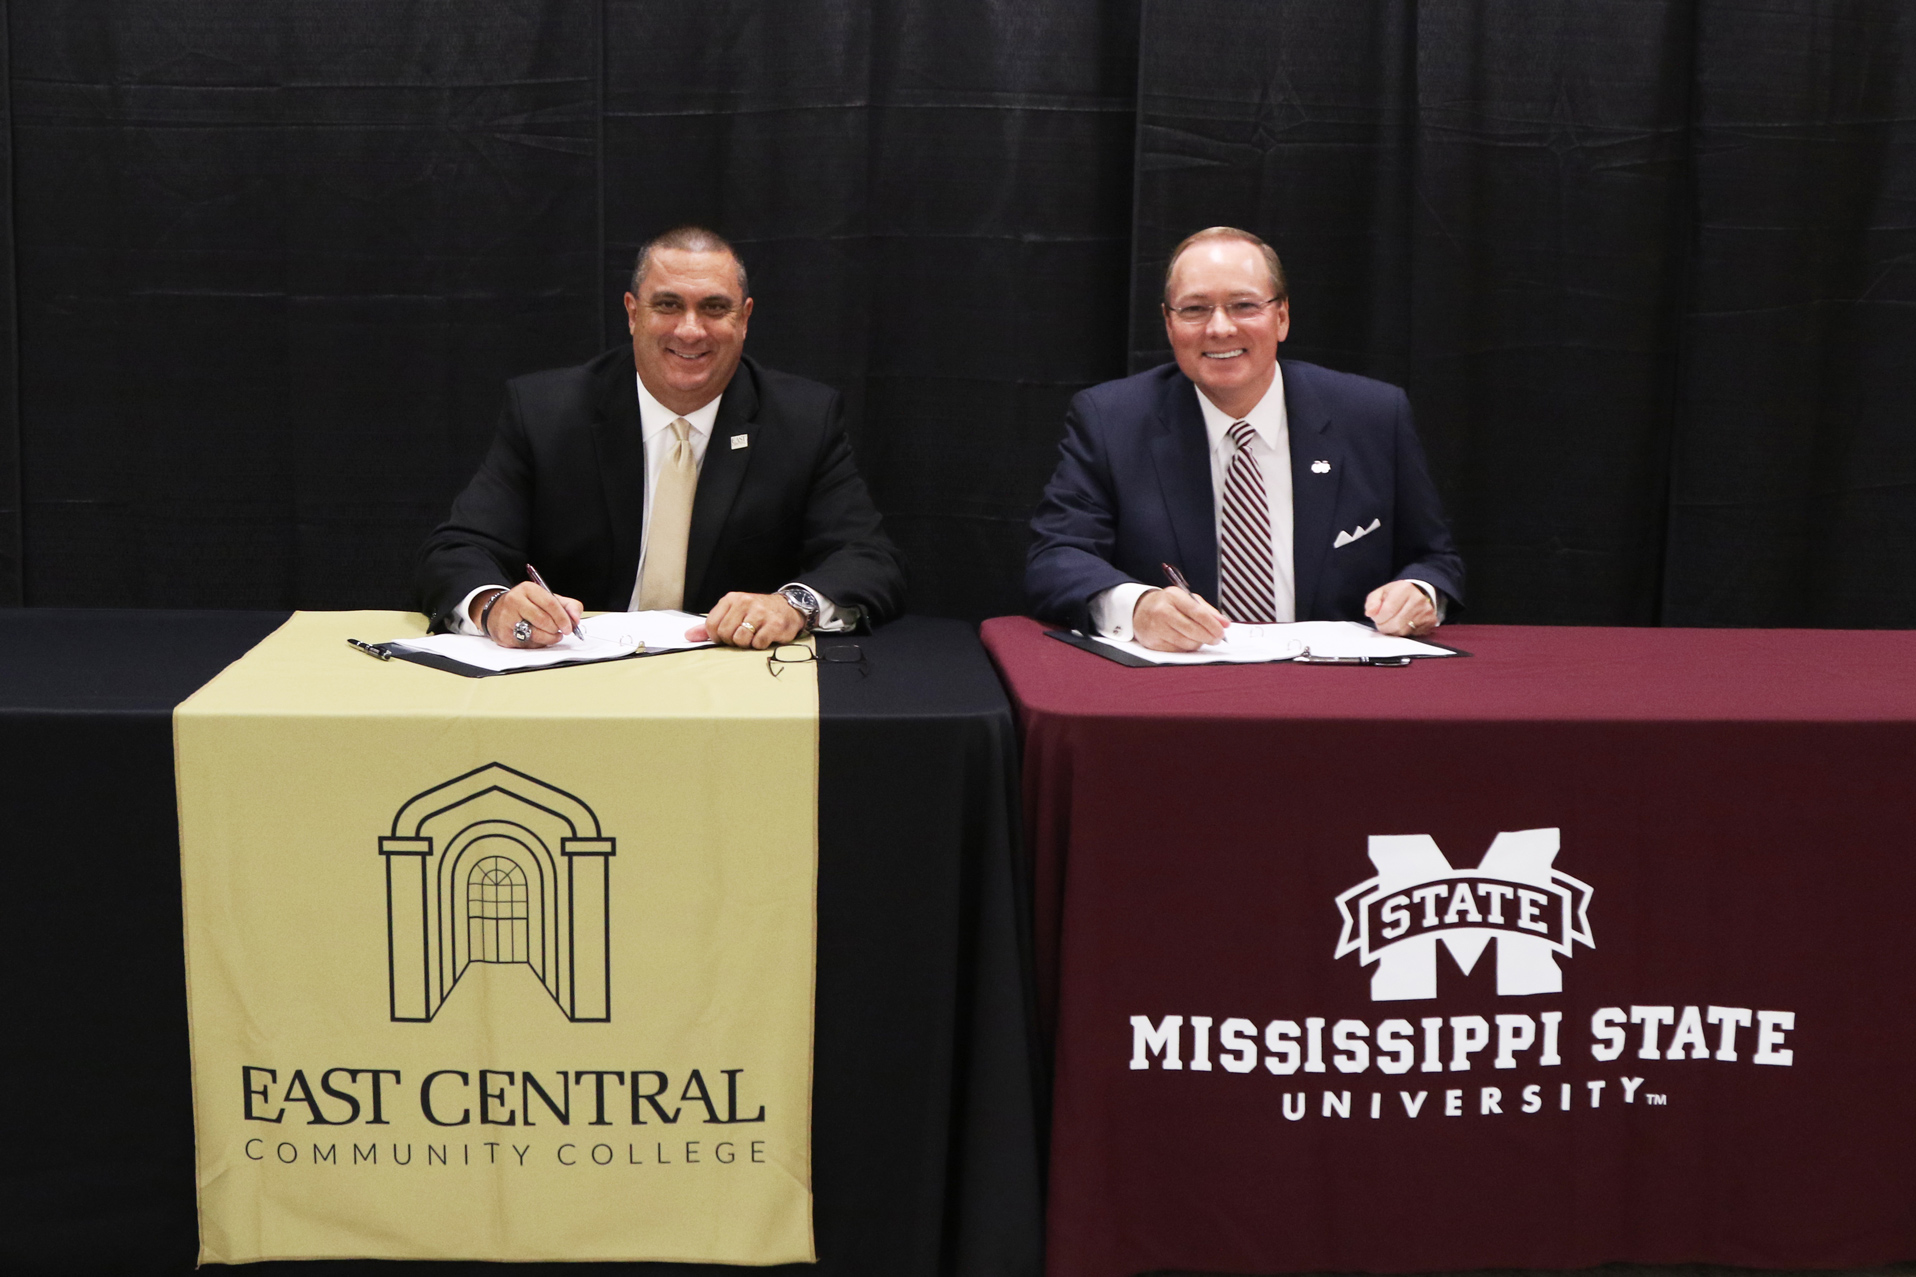 East Central Community College President Billy W. Stewart and Mississippi State University President Mark E. Keenum sign a Partnership Pathways agreement during a Tuesday [Nov. 8] ceremony at ECCC in Decatur. (Photo courtesy of East Central Community College)